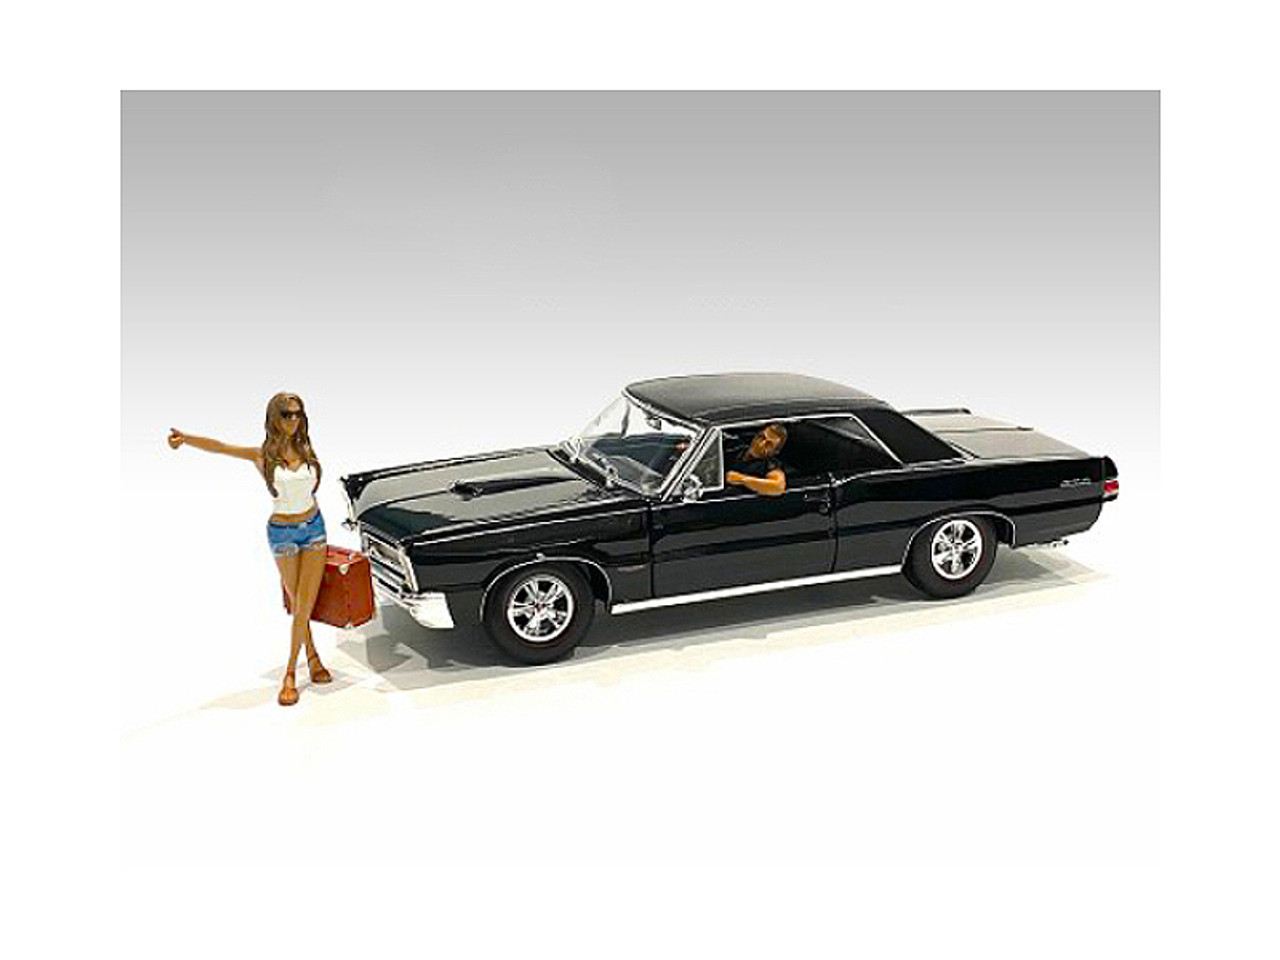 Hitchhiker 2 piece Figurine Set (White Shirt) for 1/24 Scale Models by American Diorama